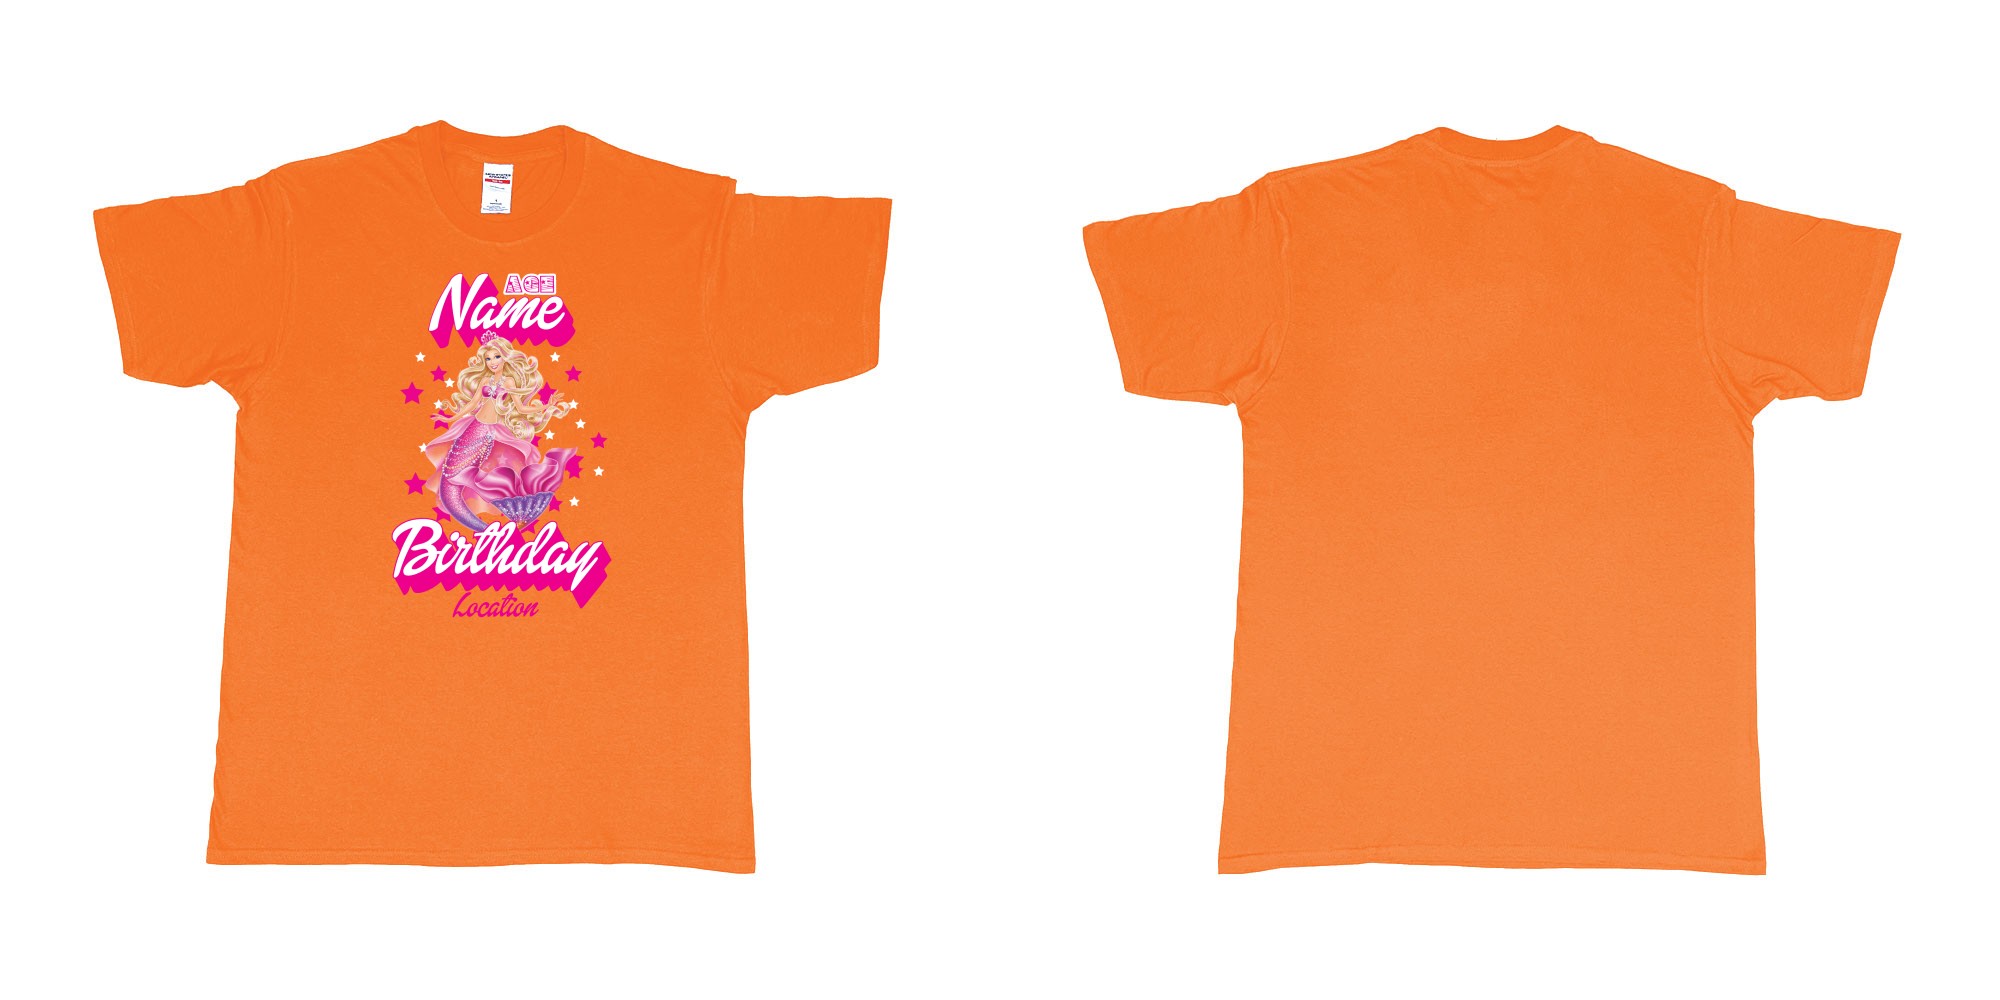 Custom tshirt design barbie mermaid custom name birthday in fabric color orange choice your own text made in Bali by The Pirate Way